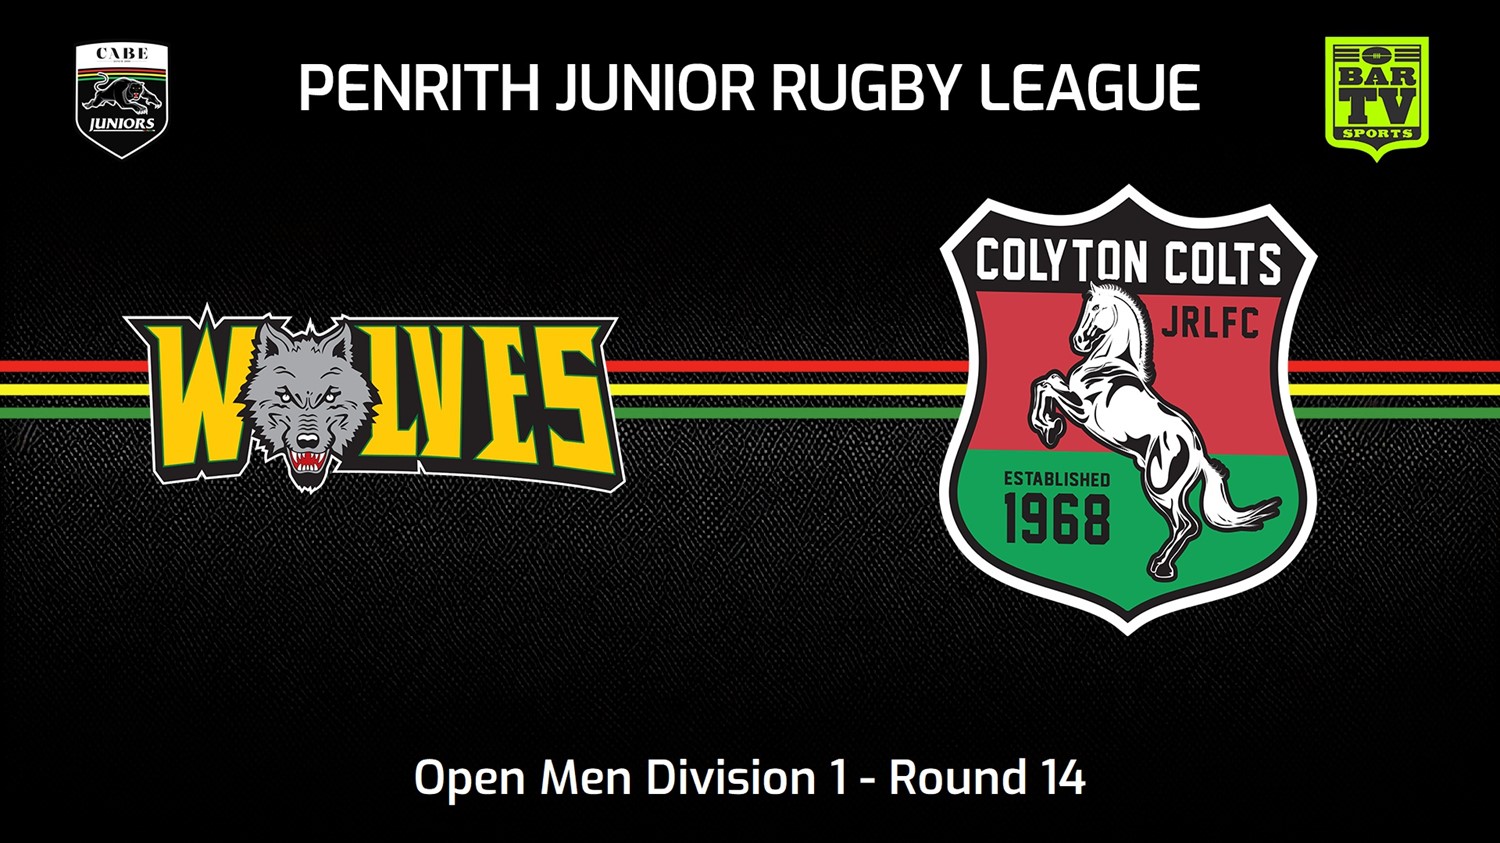 230730-Penrith & District Junior Rugby League Round 14 - Open Men Division 1 - Windsor Wolves v Colyton Colts Minigame Slate Image